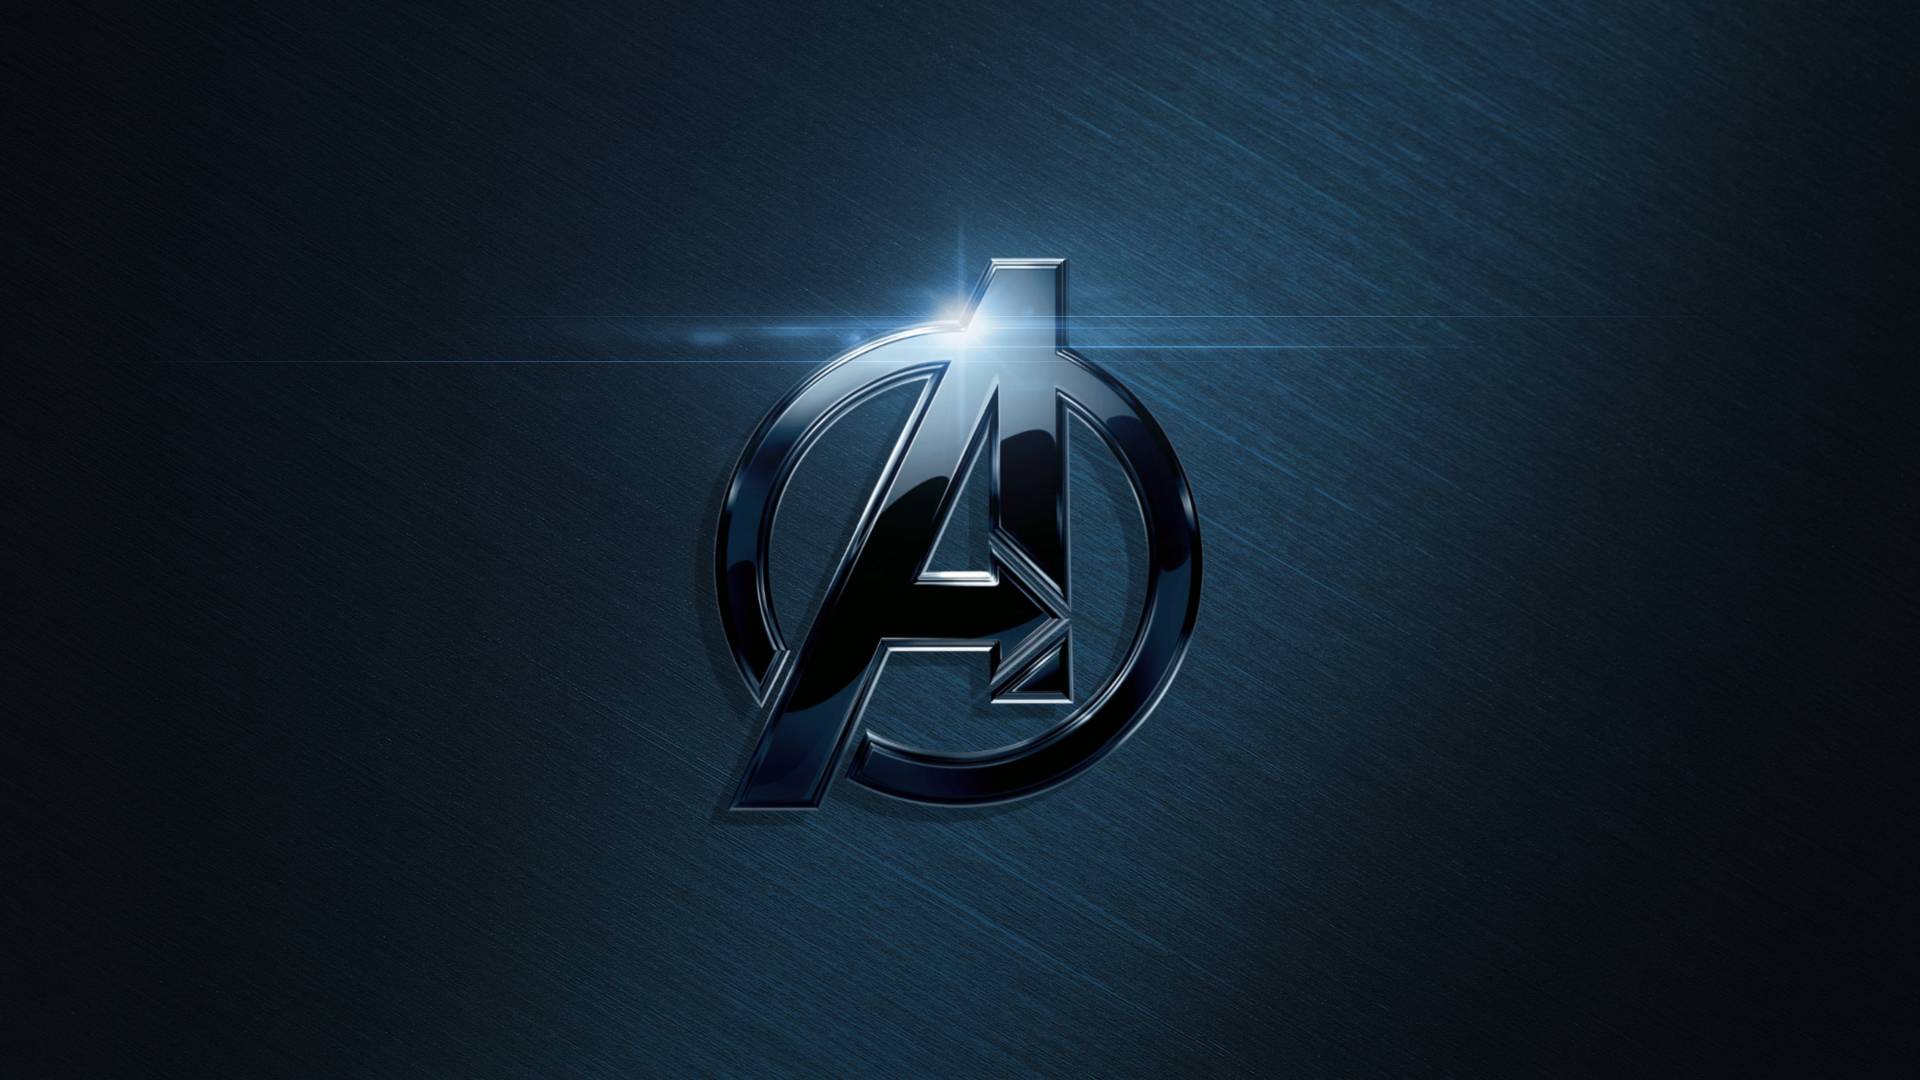 Cool Hero Logo - Get your Super Hero fix with these 20 awesome wallpapers